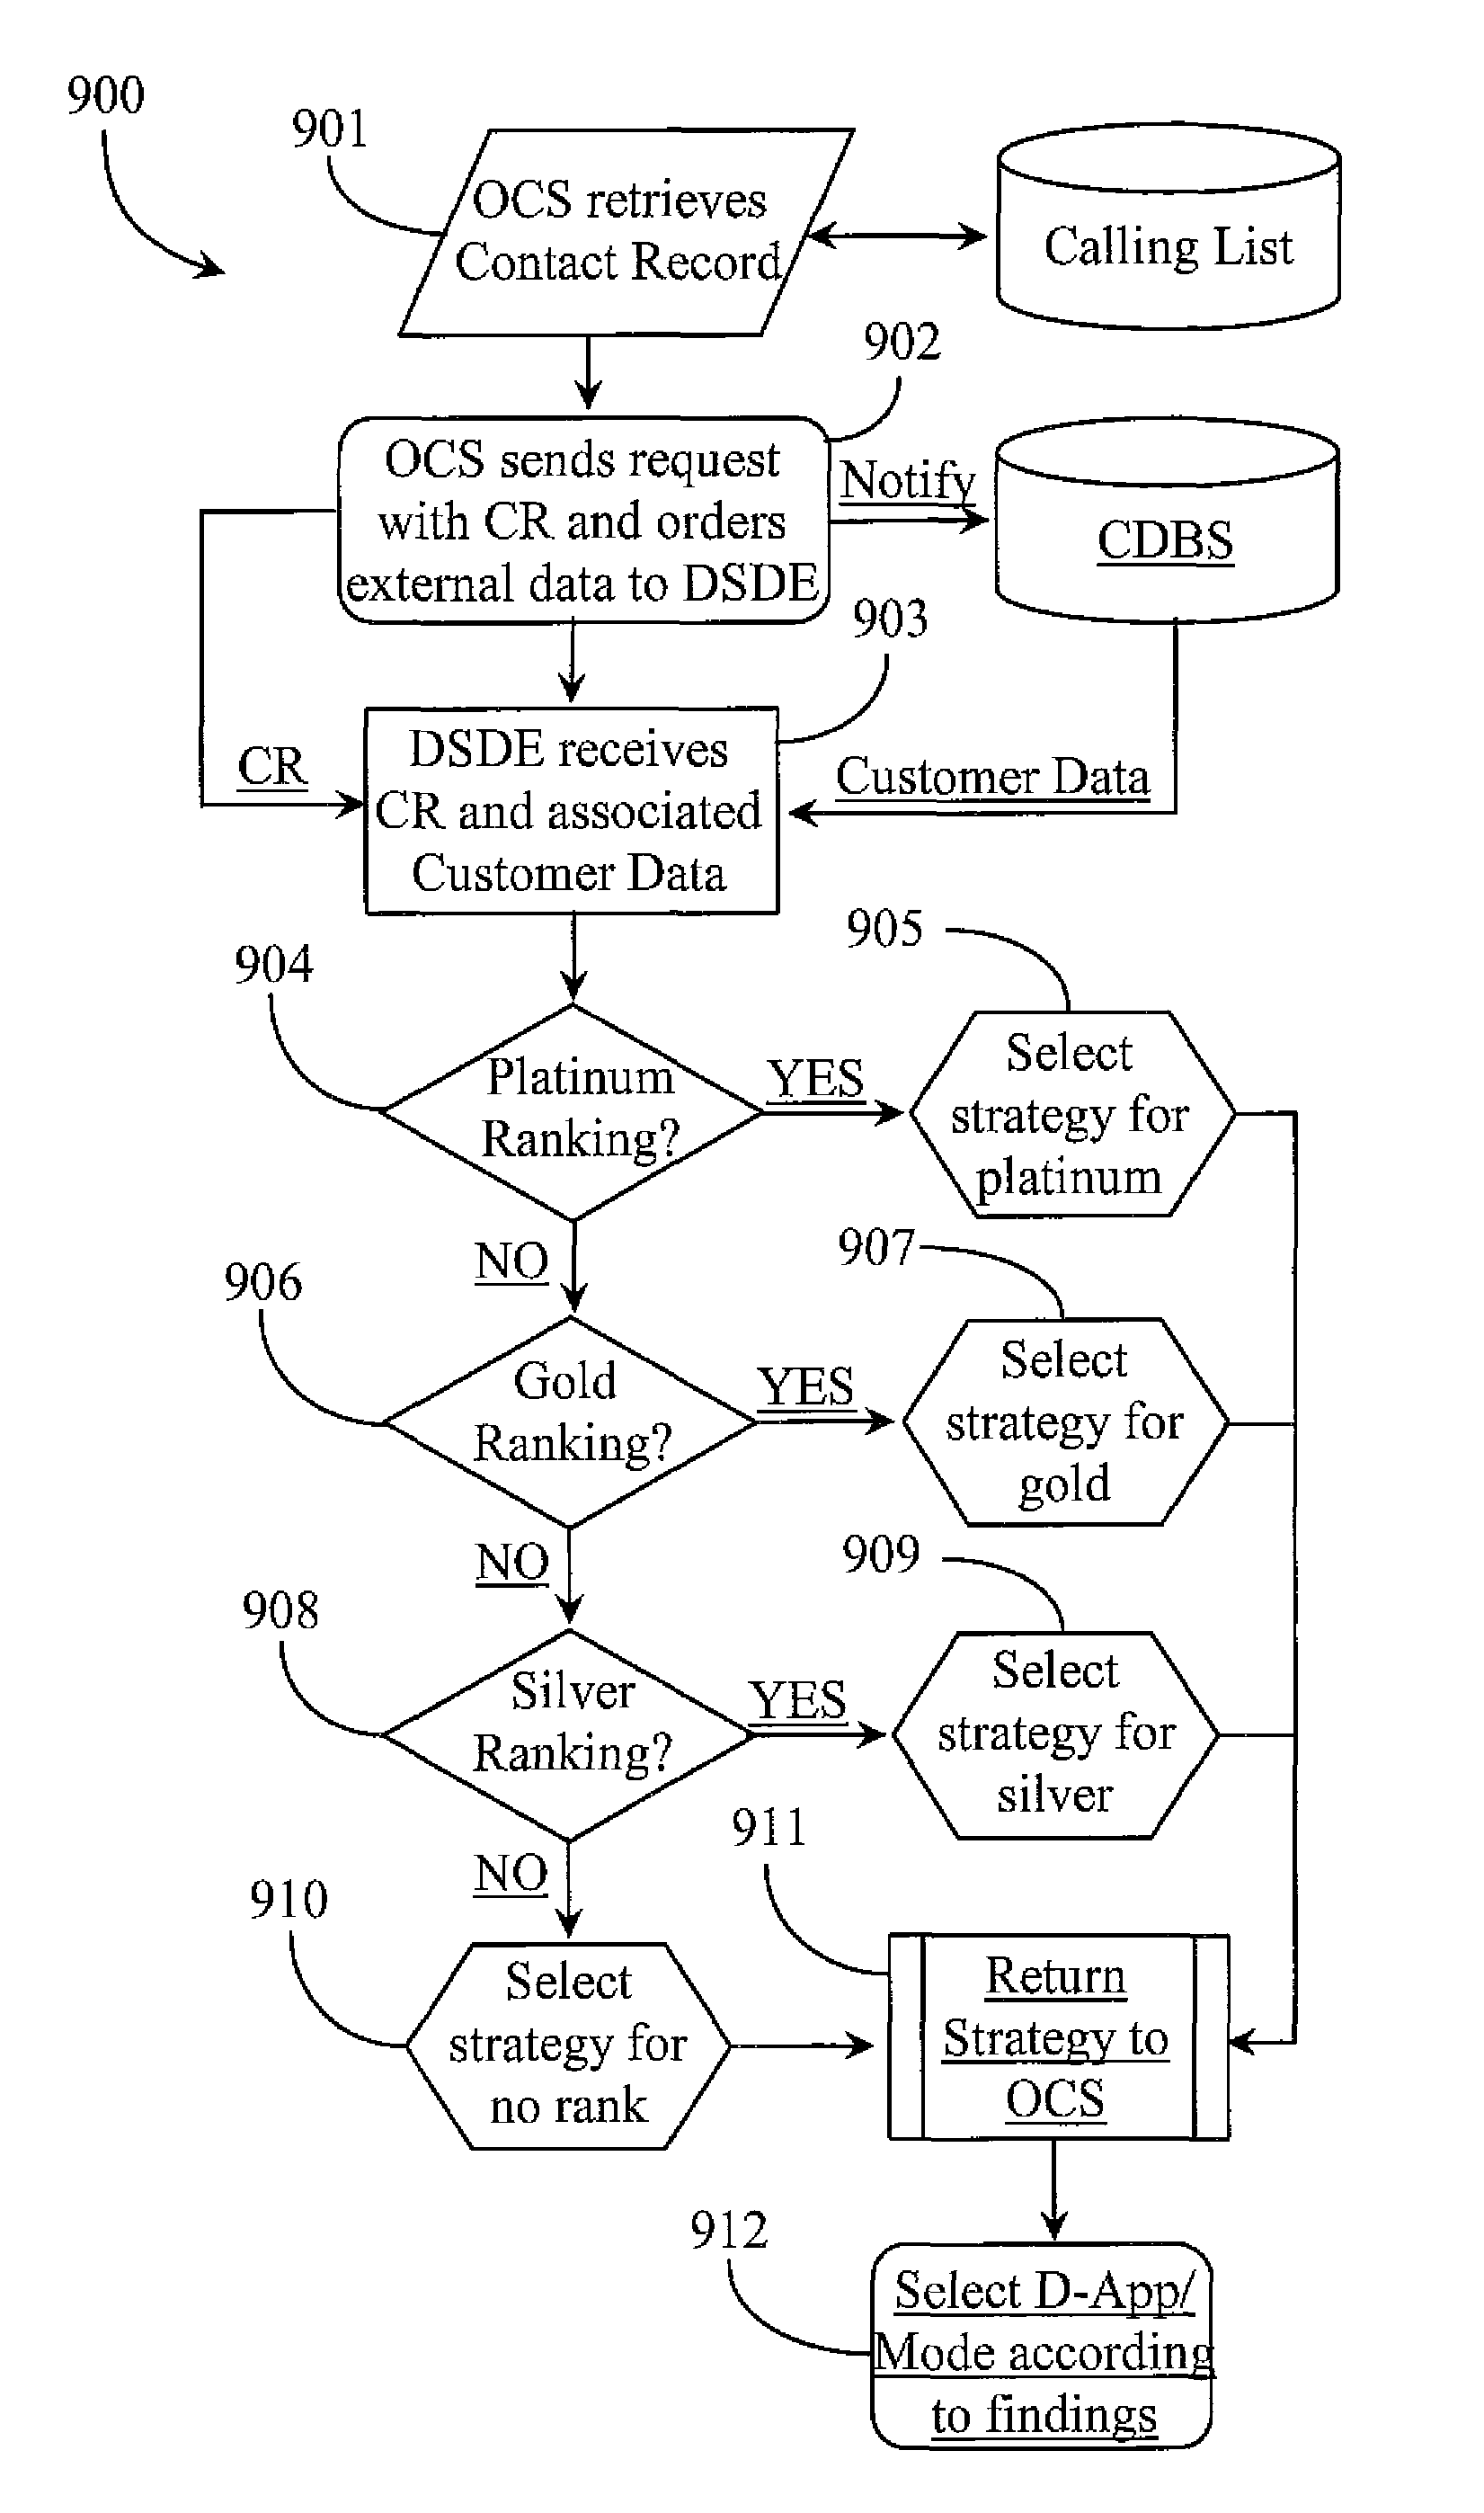 System and methods for selecting a dialing strategy for placing an outbound call